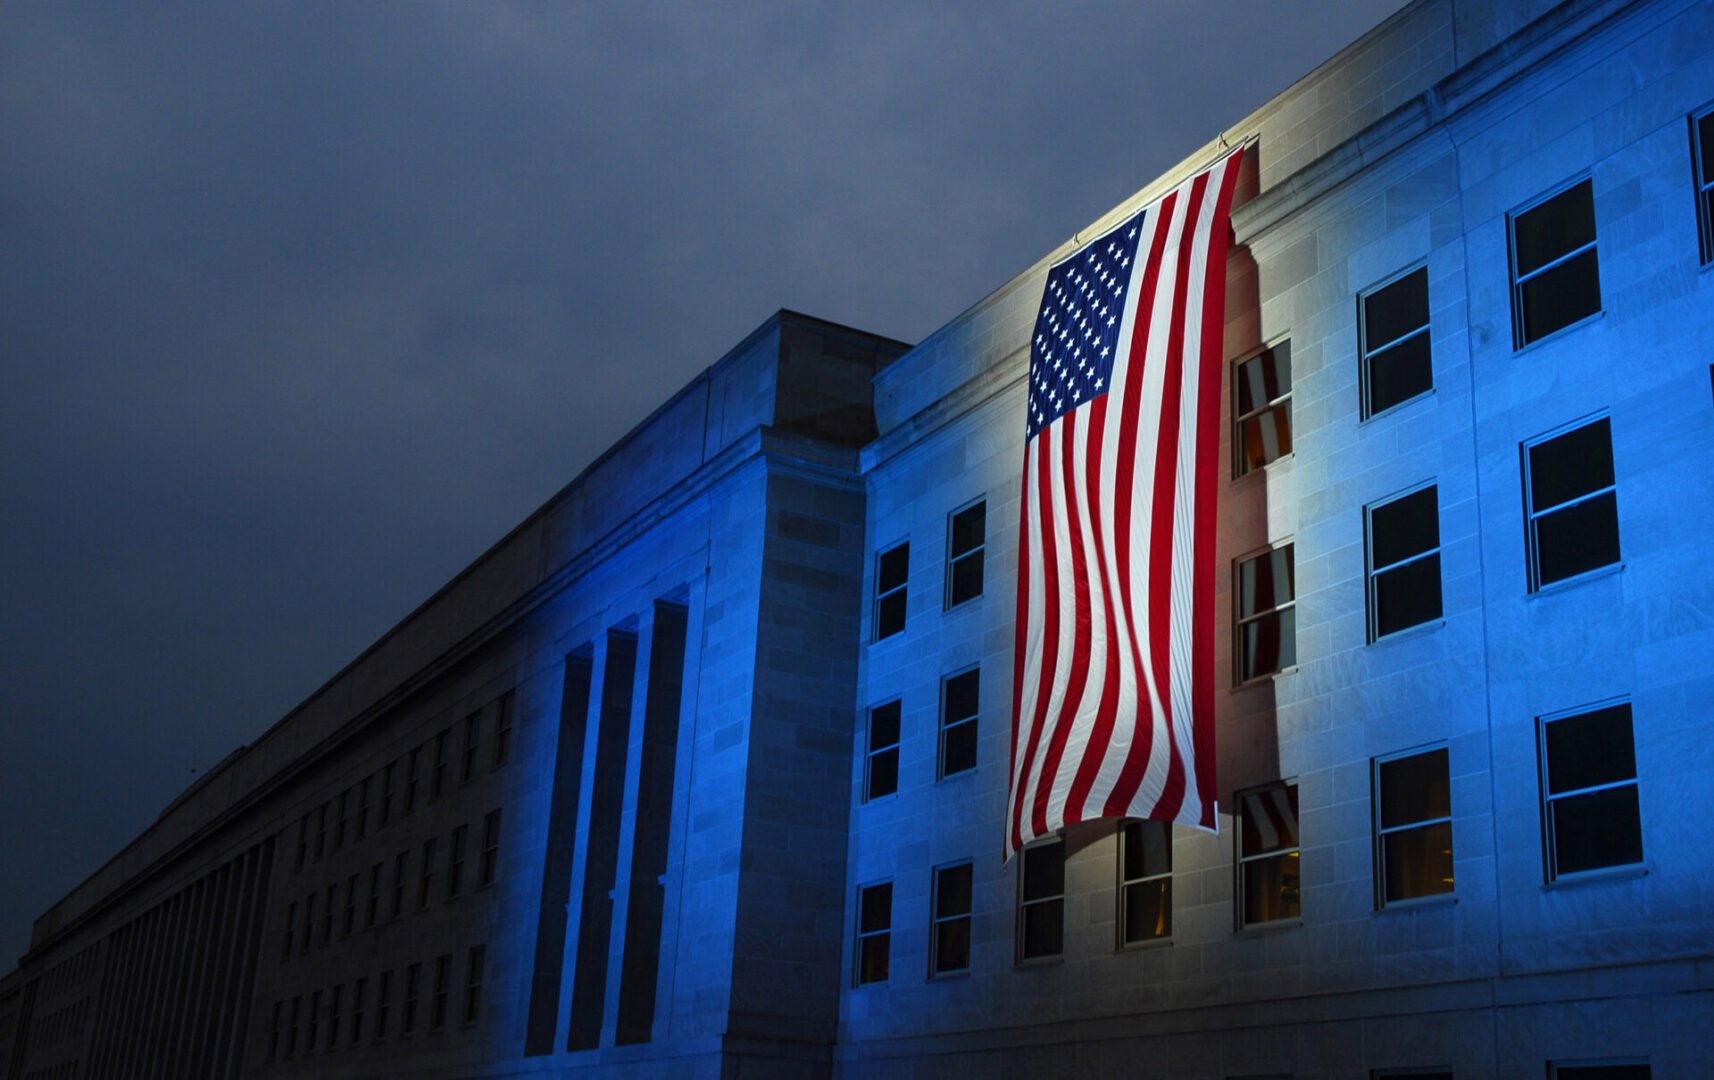 A large american flag hanging from the side of a building.